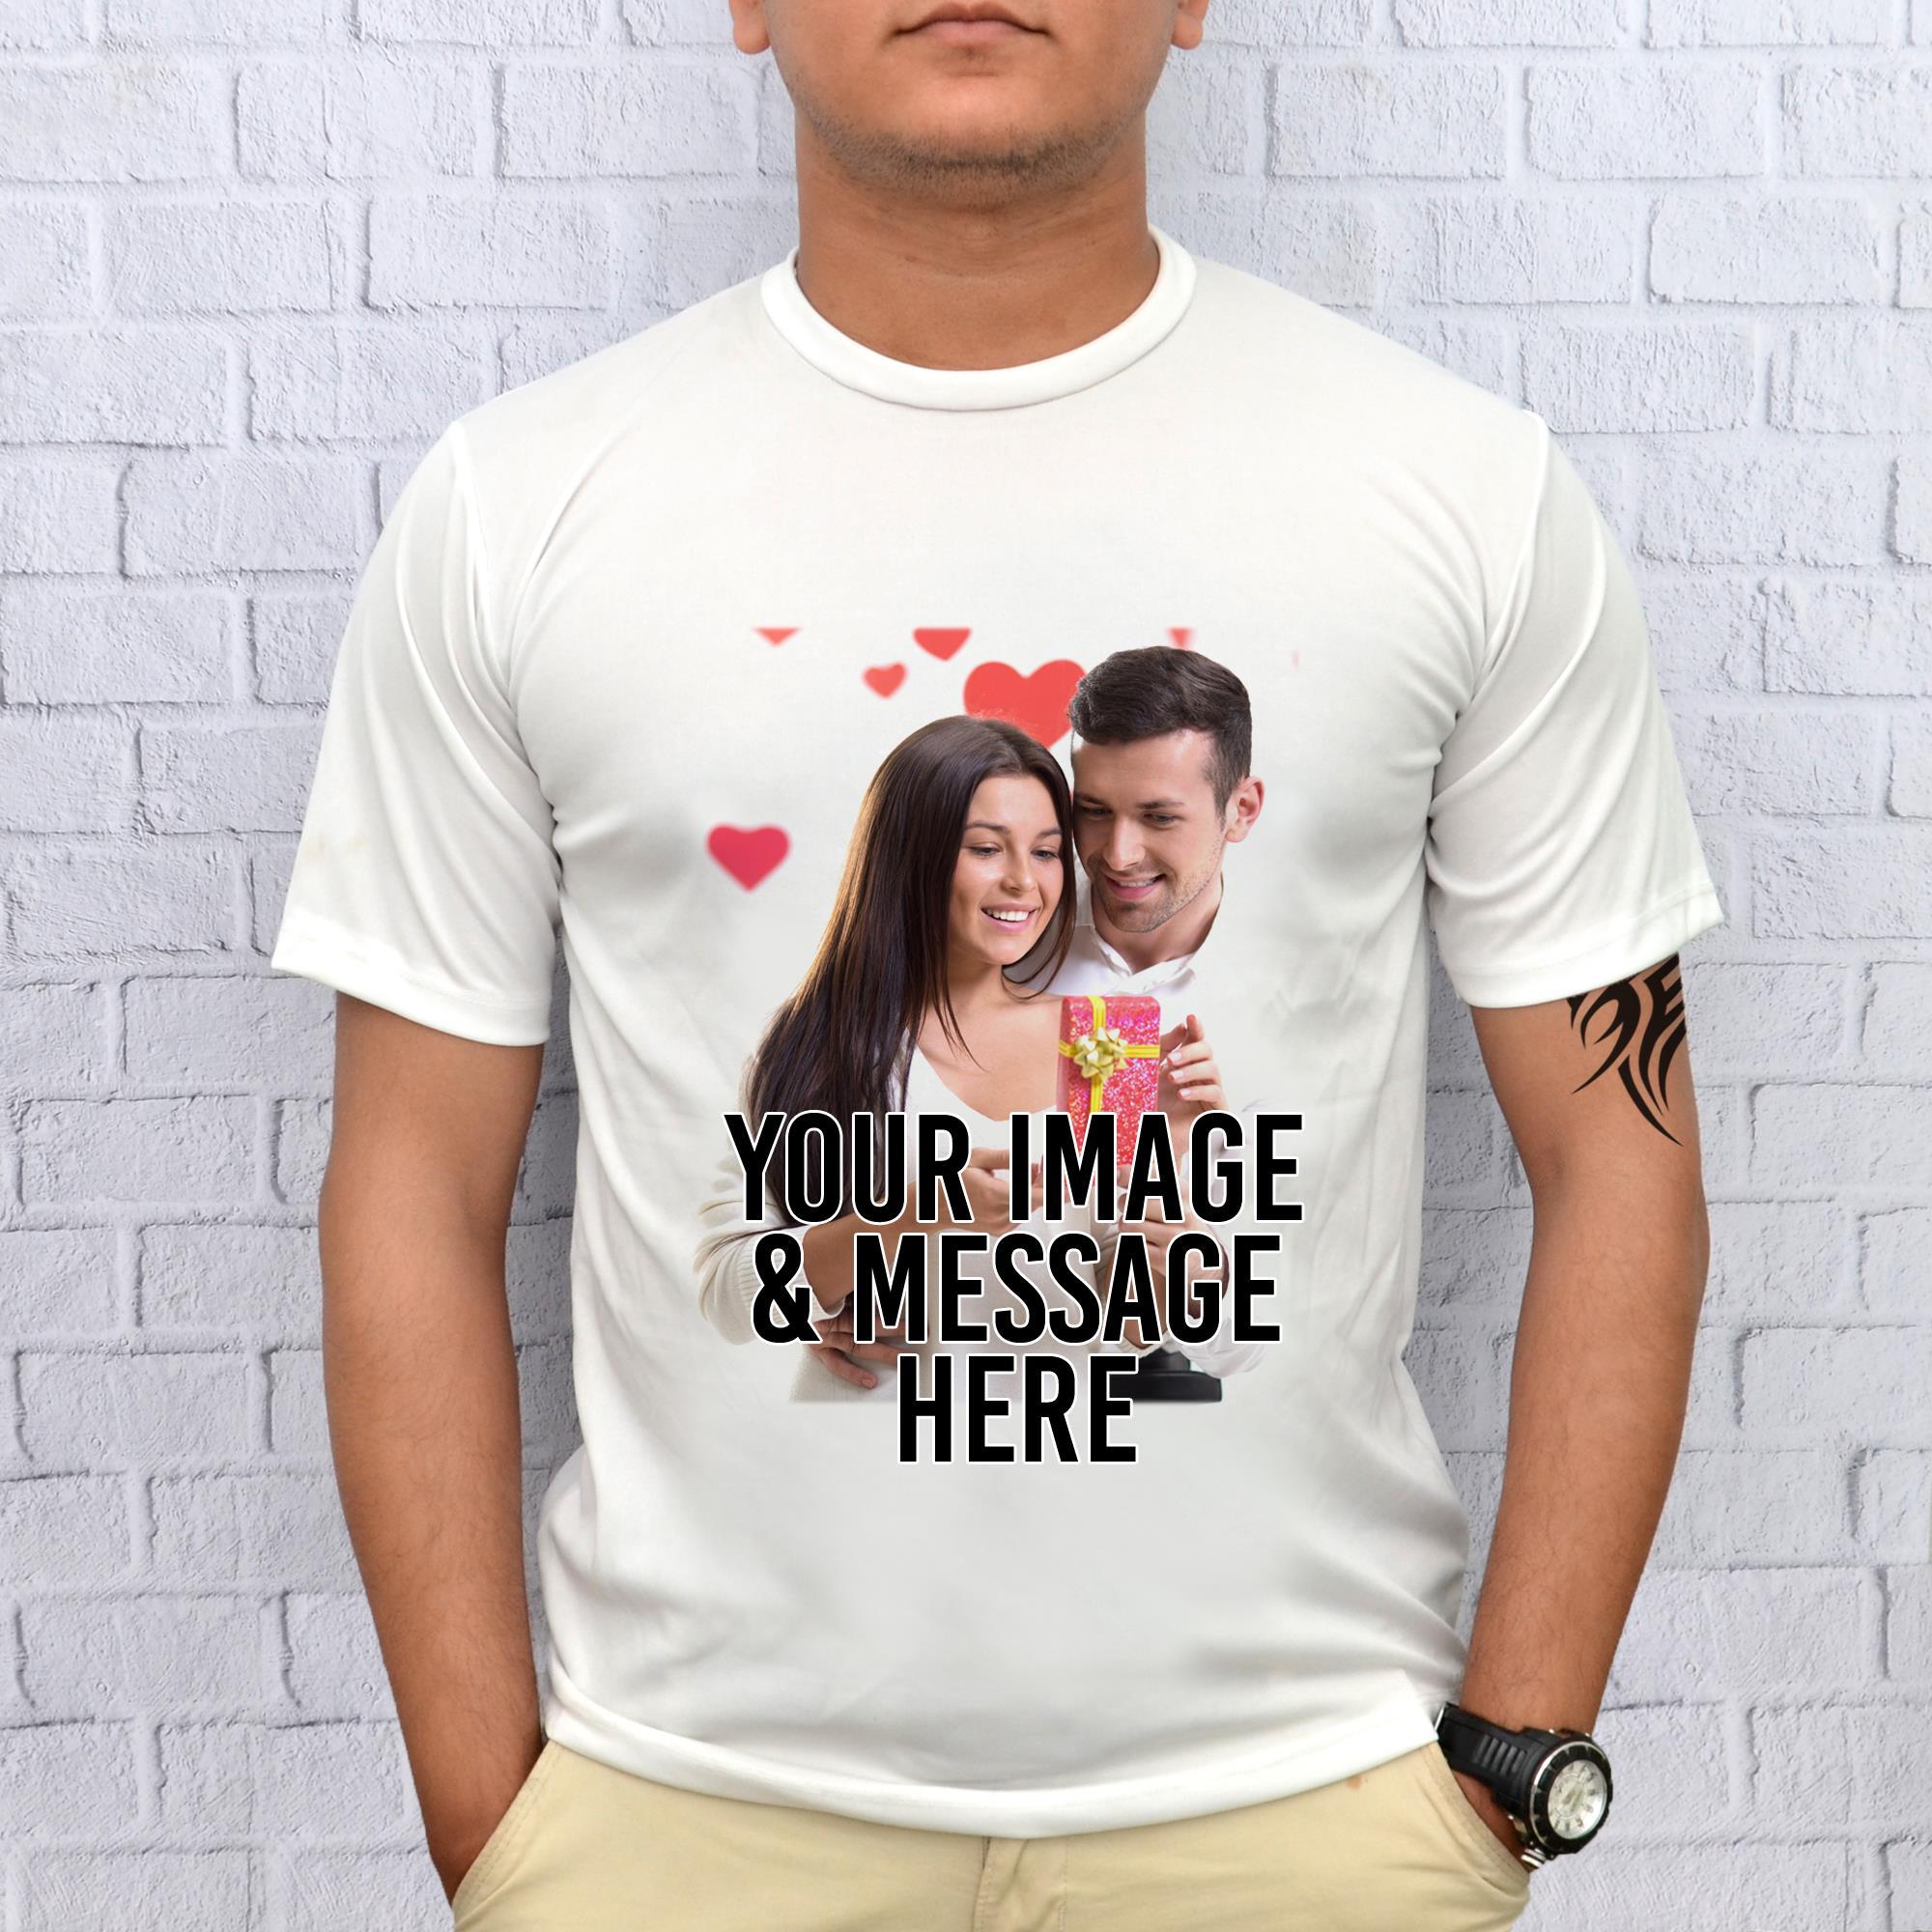 Personalized White T-Shirt | Personalized T-Shirts to India